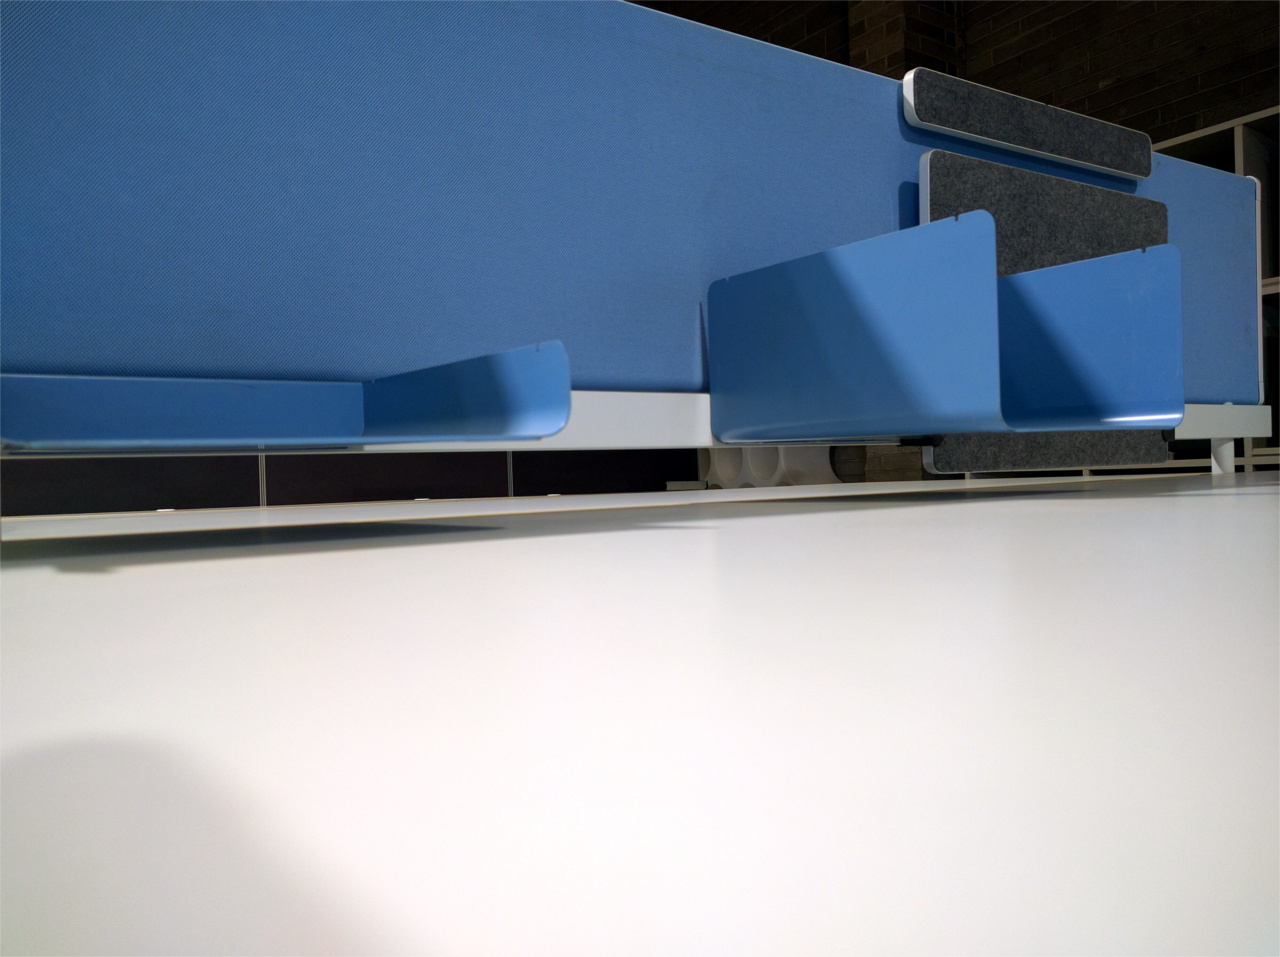 Blue workstation screen with shelving